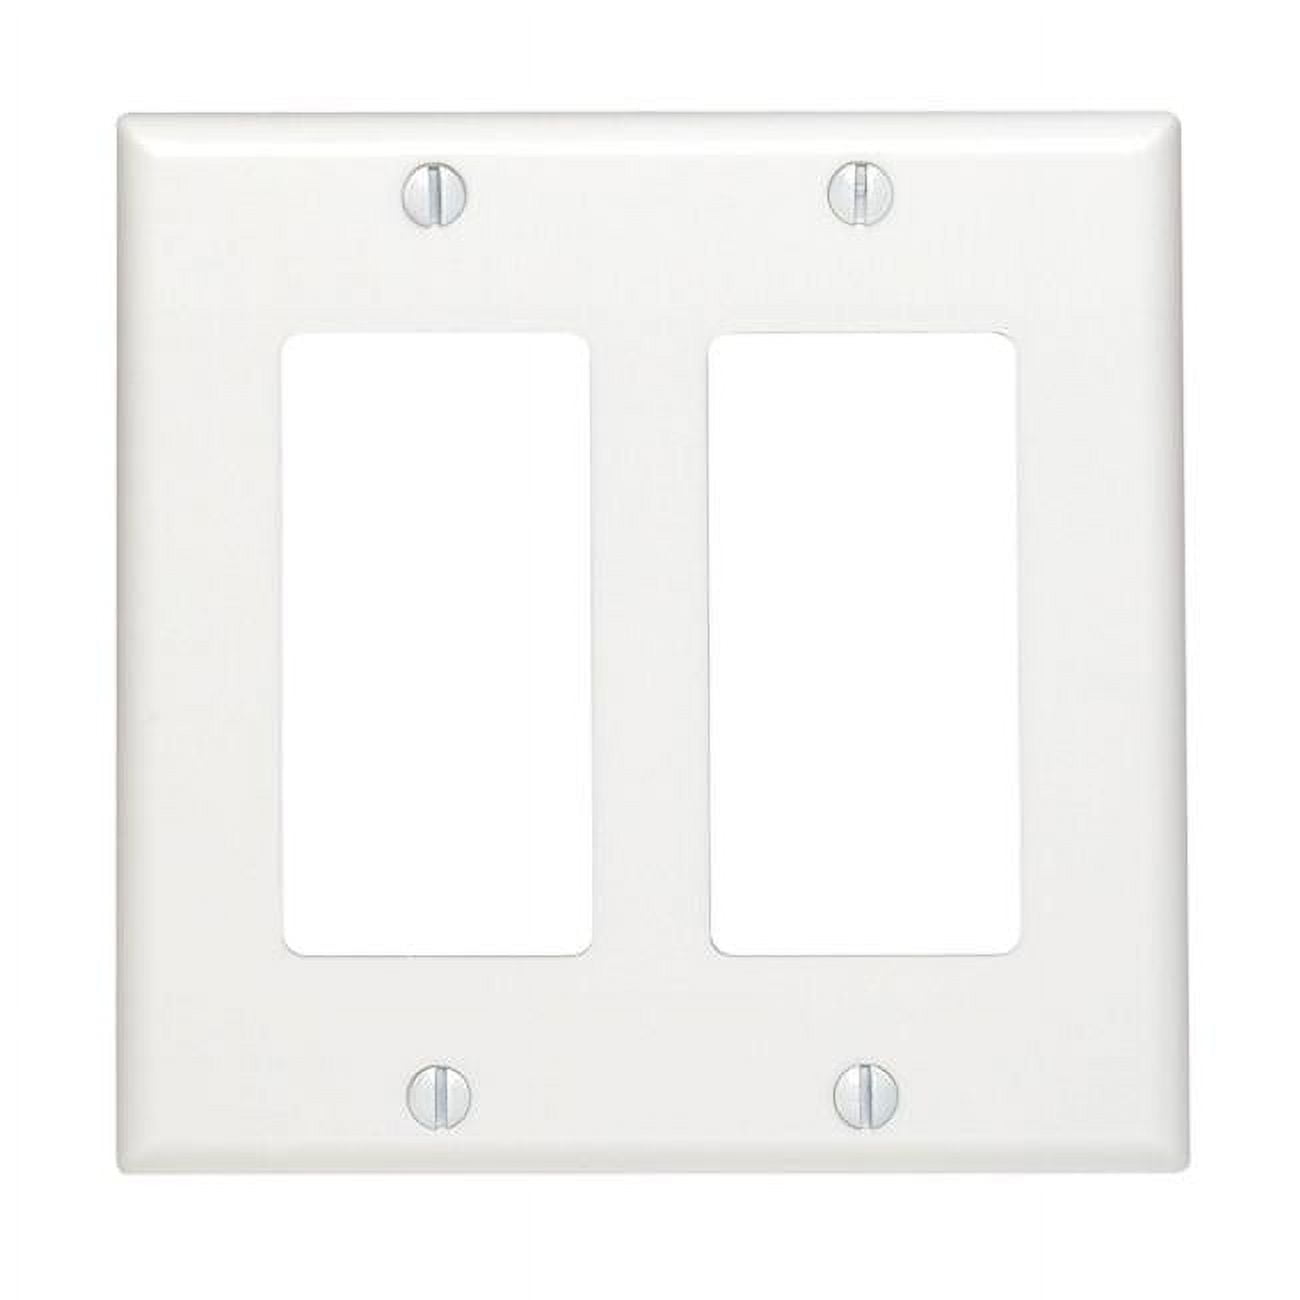 Leviton Manufacturing Co Inc Leviton 3008382 Decora 2 Gang Thermoset Plastic Rocker Wall Plate, White - Pack of 50